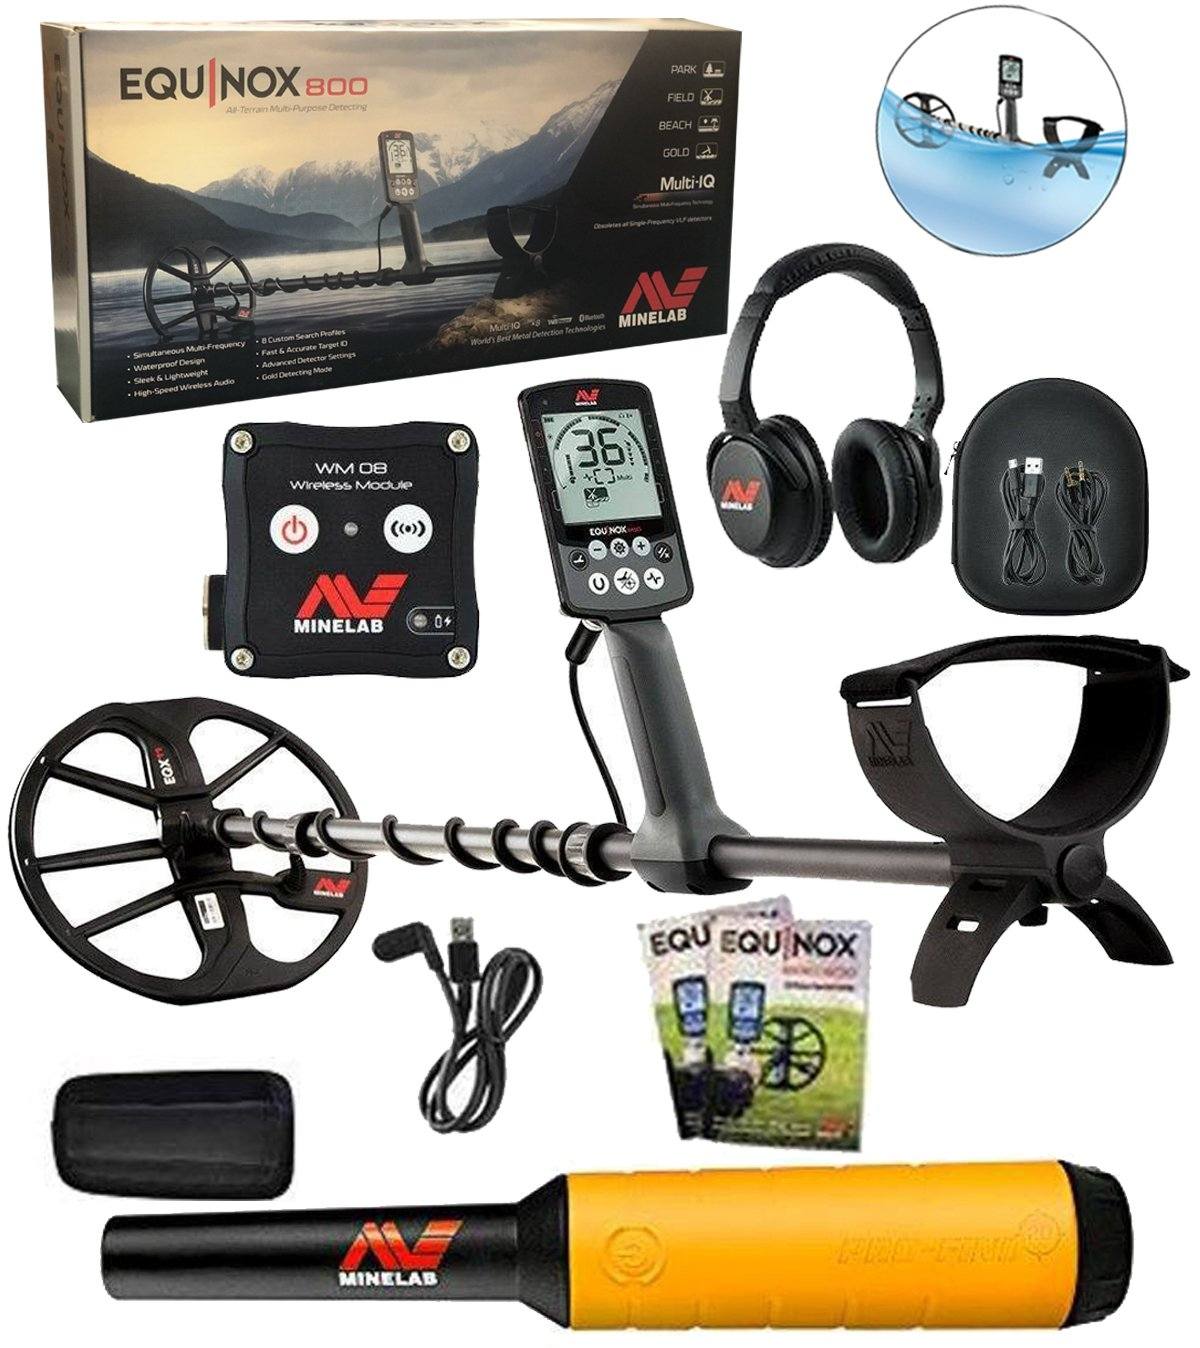 Minelab Equinox 800 Metal Detector with Pro-Find 20 Pinpointer